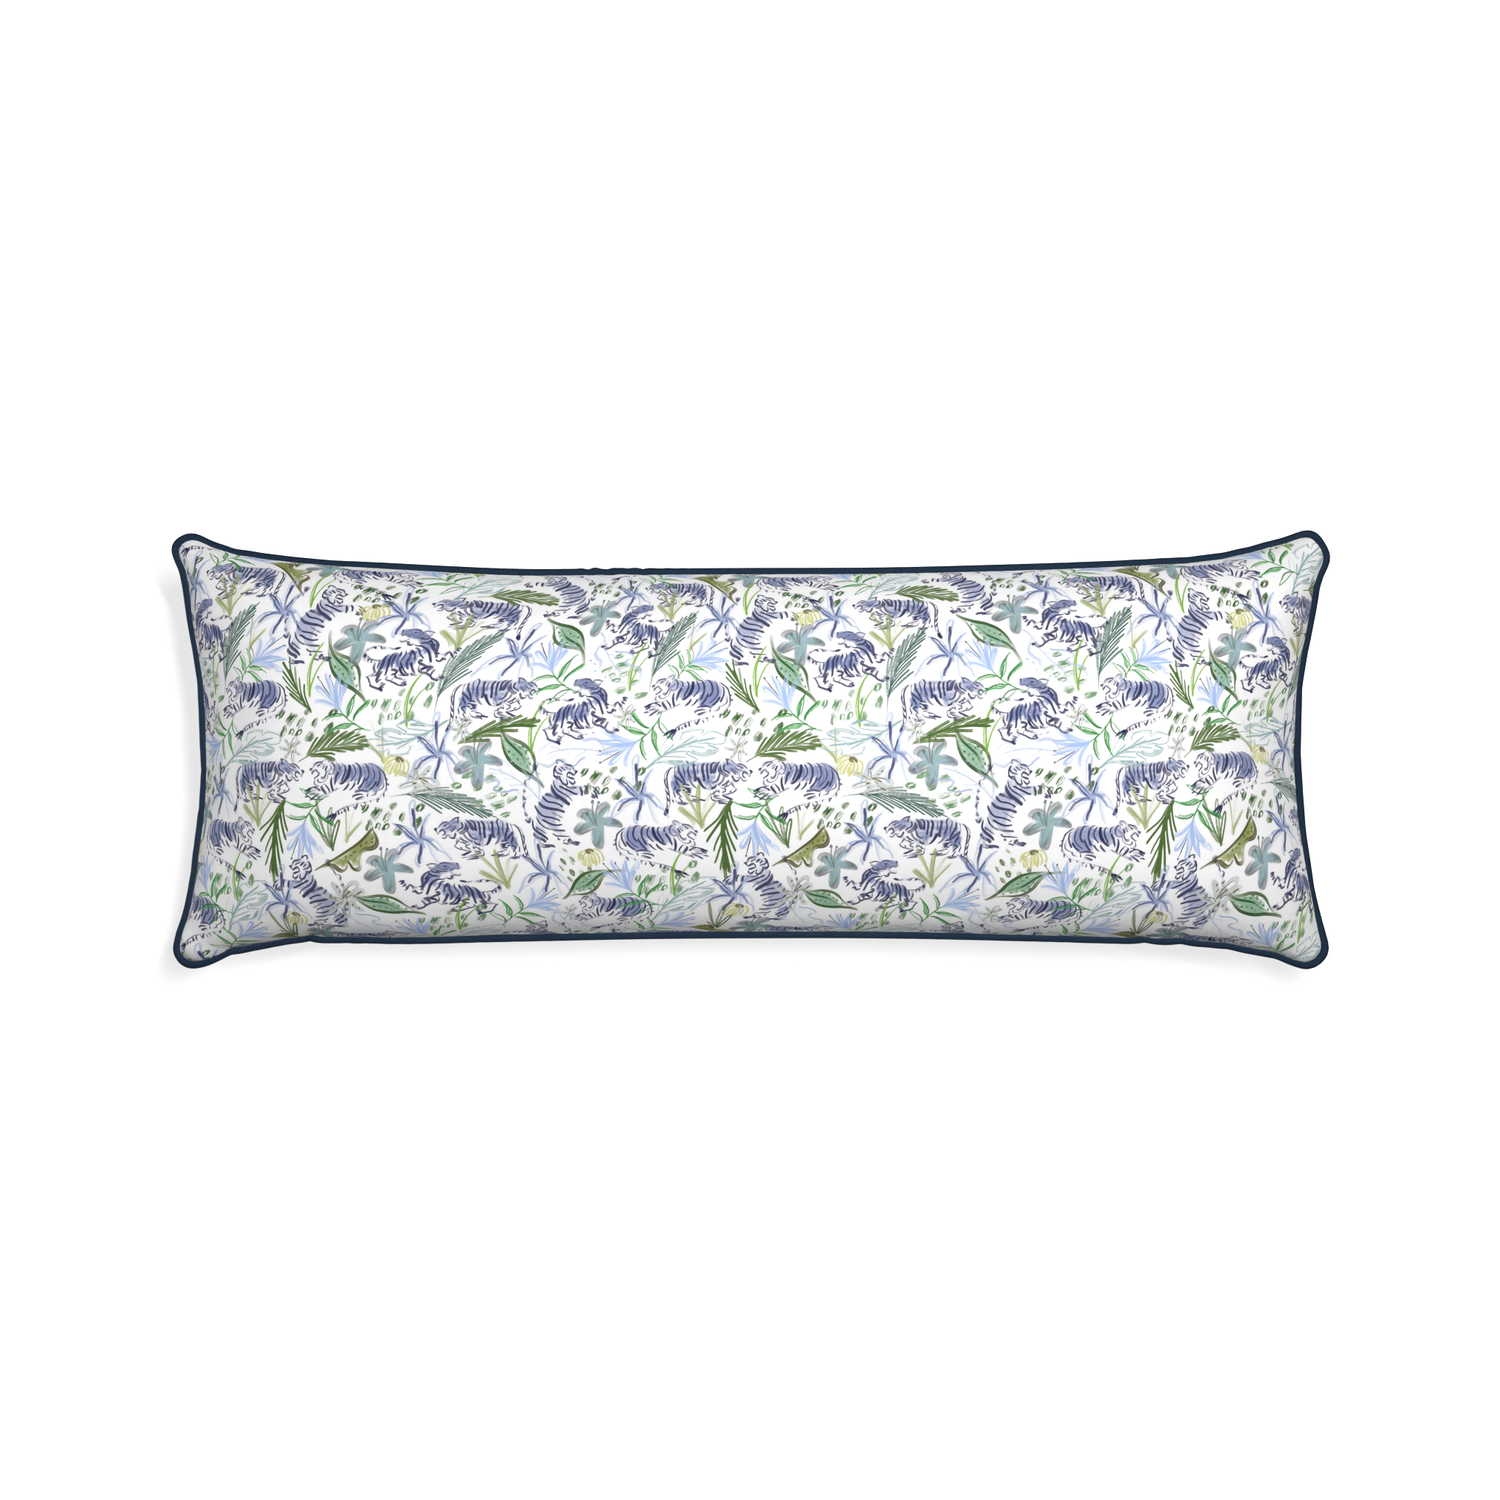 Xl-lumbar frida green custom green tigerpillow with c piping on white background